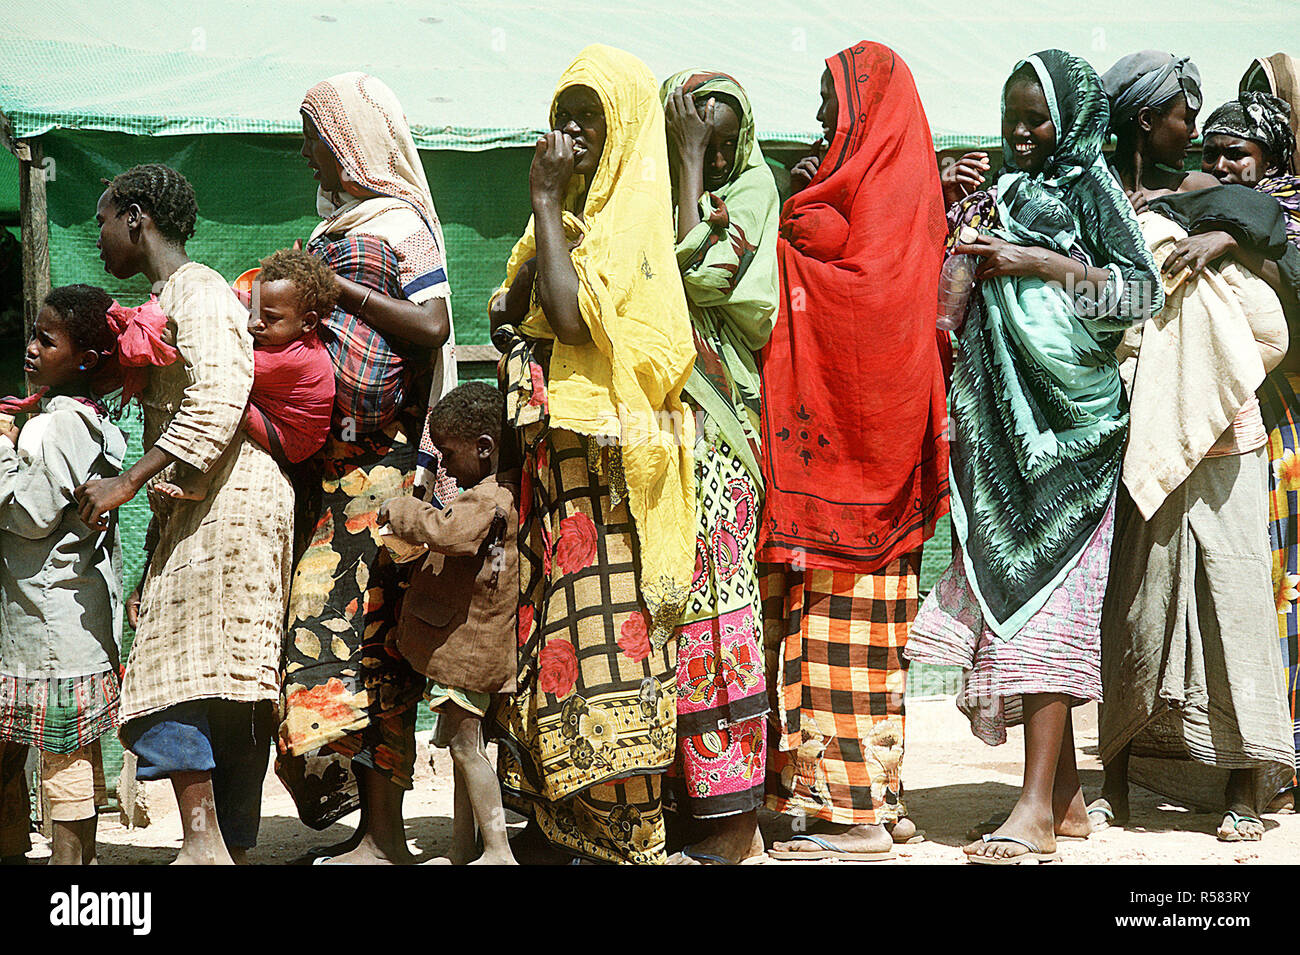 1993 -Somali women and children line up at an aid station during the multinational relief effort Operation Restore Hope. Stock Photo